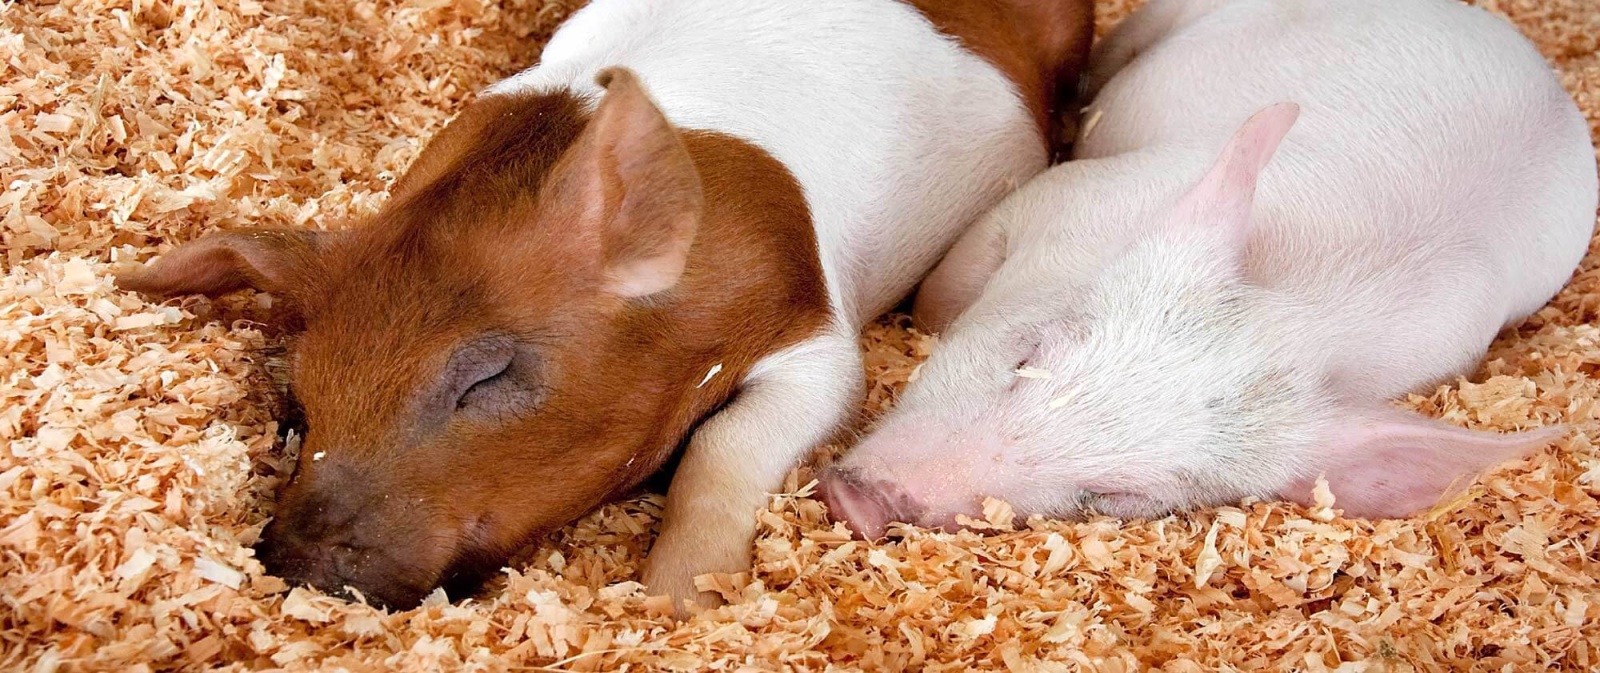 Two piglets sleeping on animal bedding made from wood shavings